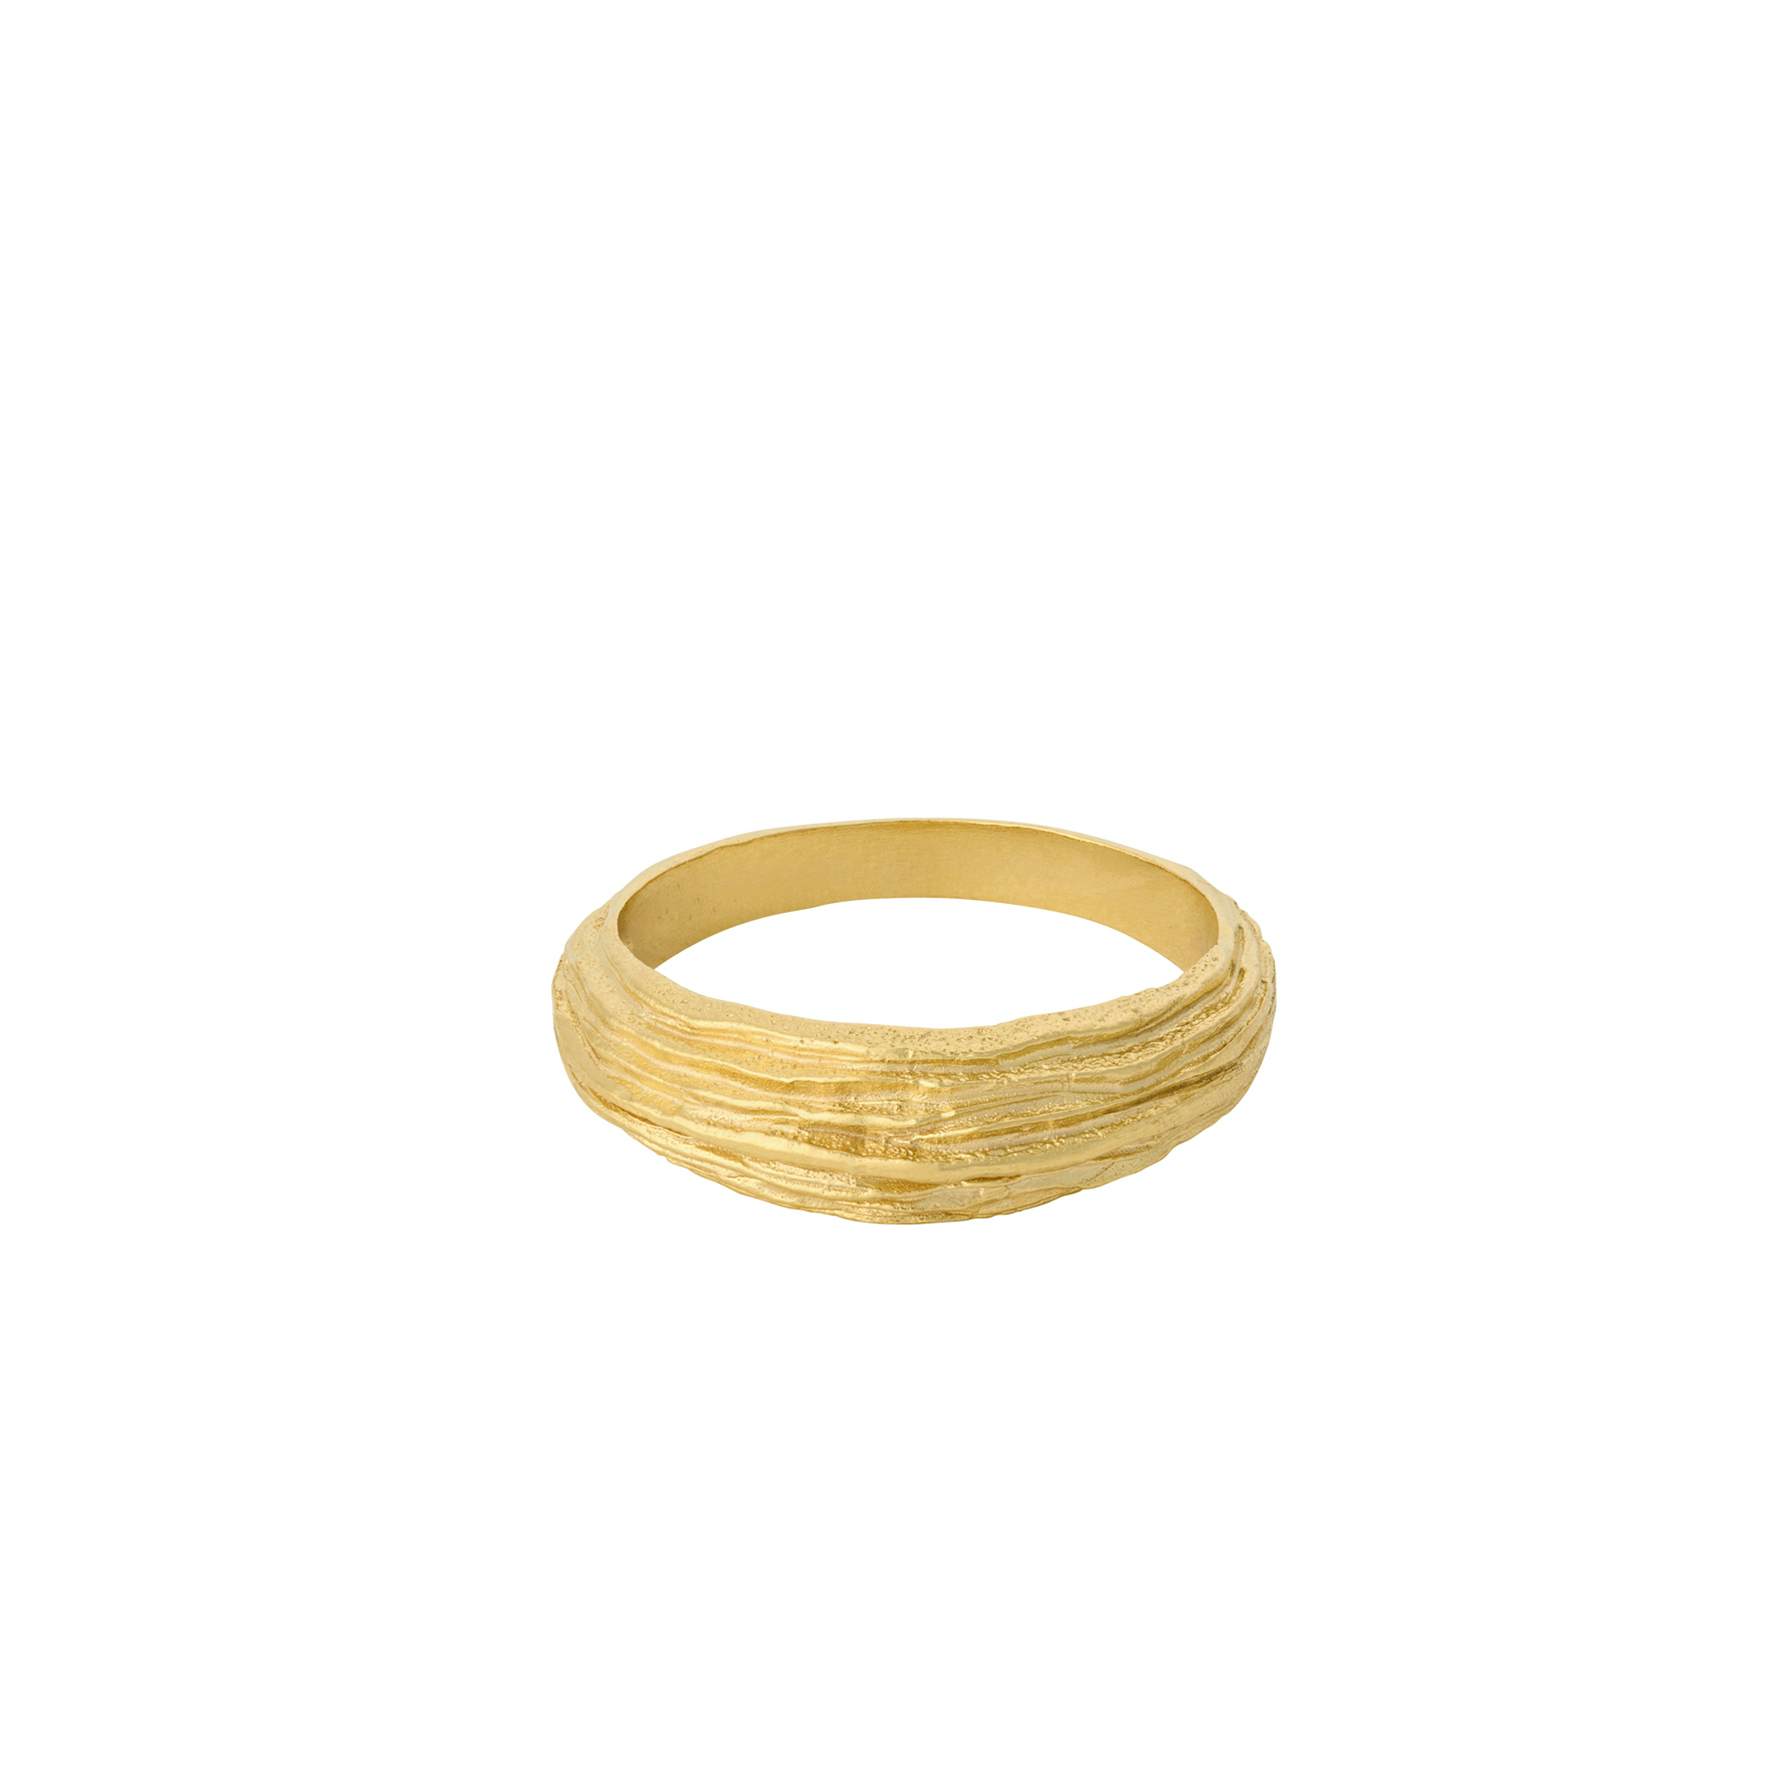 Coastline Ring from Pernille Corydon in Goldplated-Silver Sterling 925